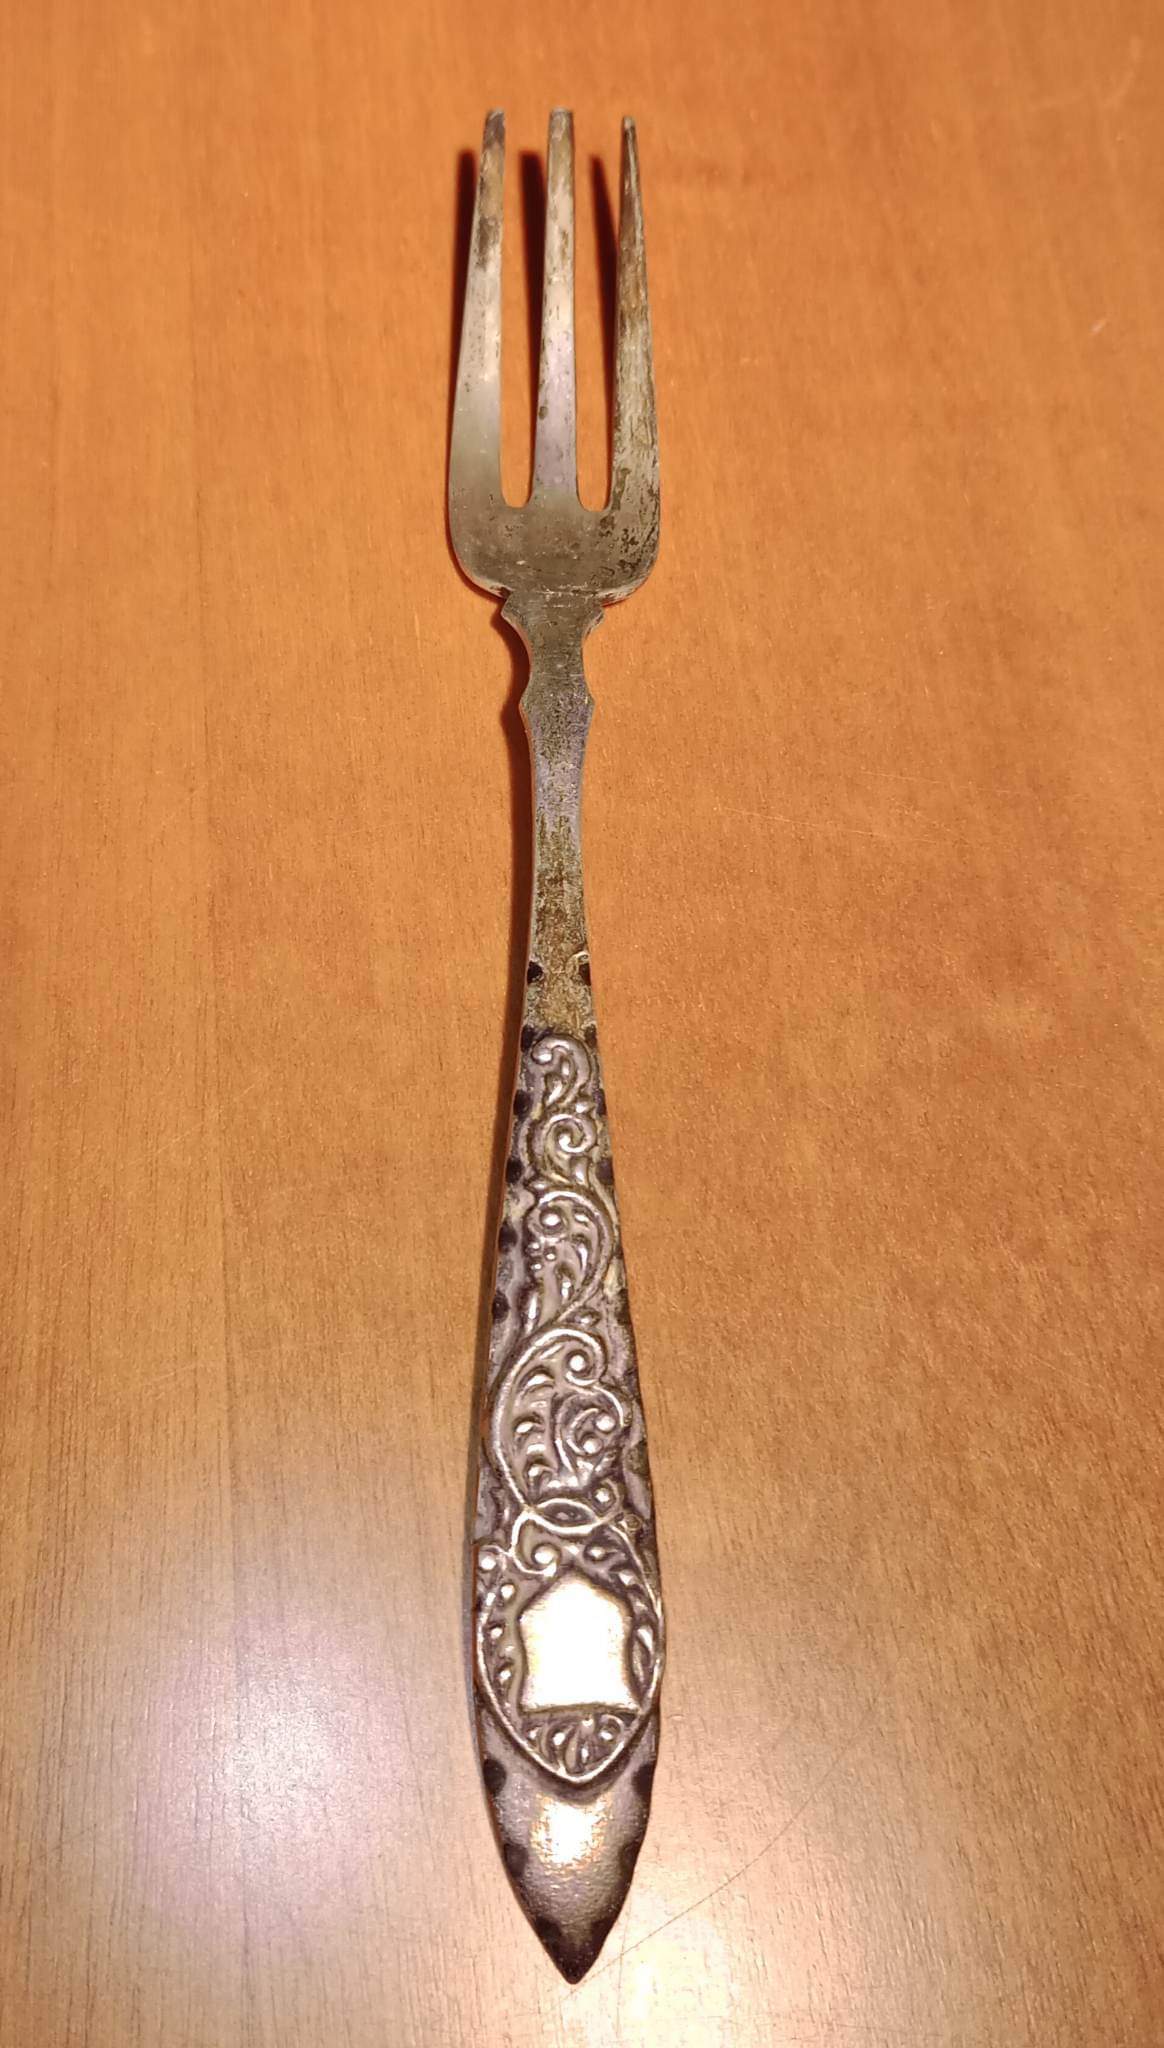 @trumpman/another-silver-fork